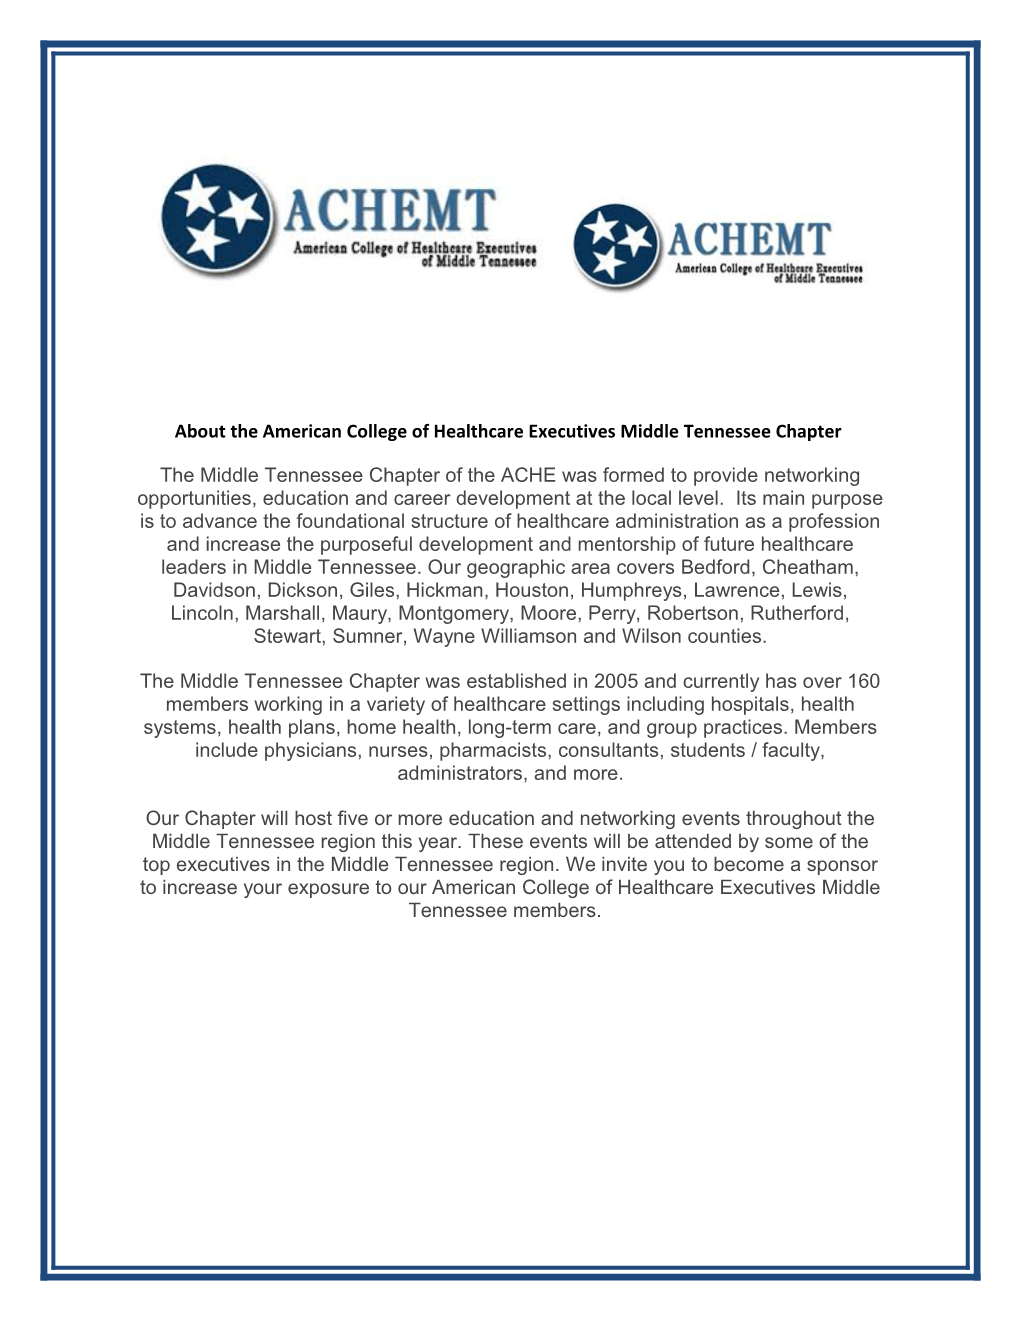 About the American College of Healthcare Executives Middle Tennessee Chapter